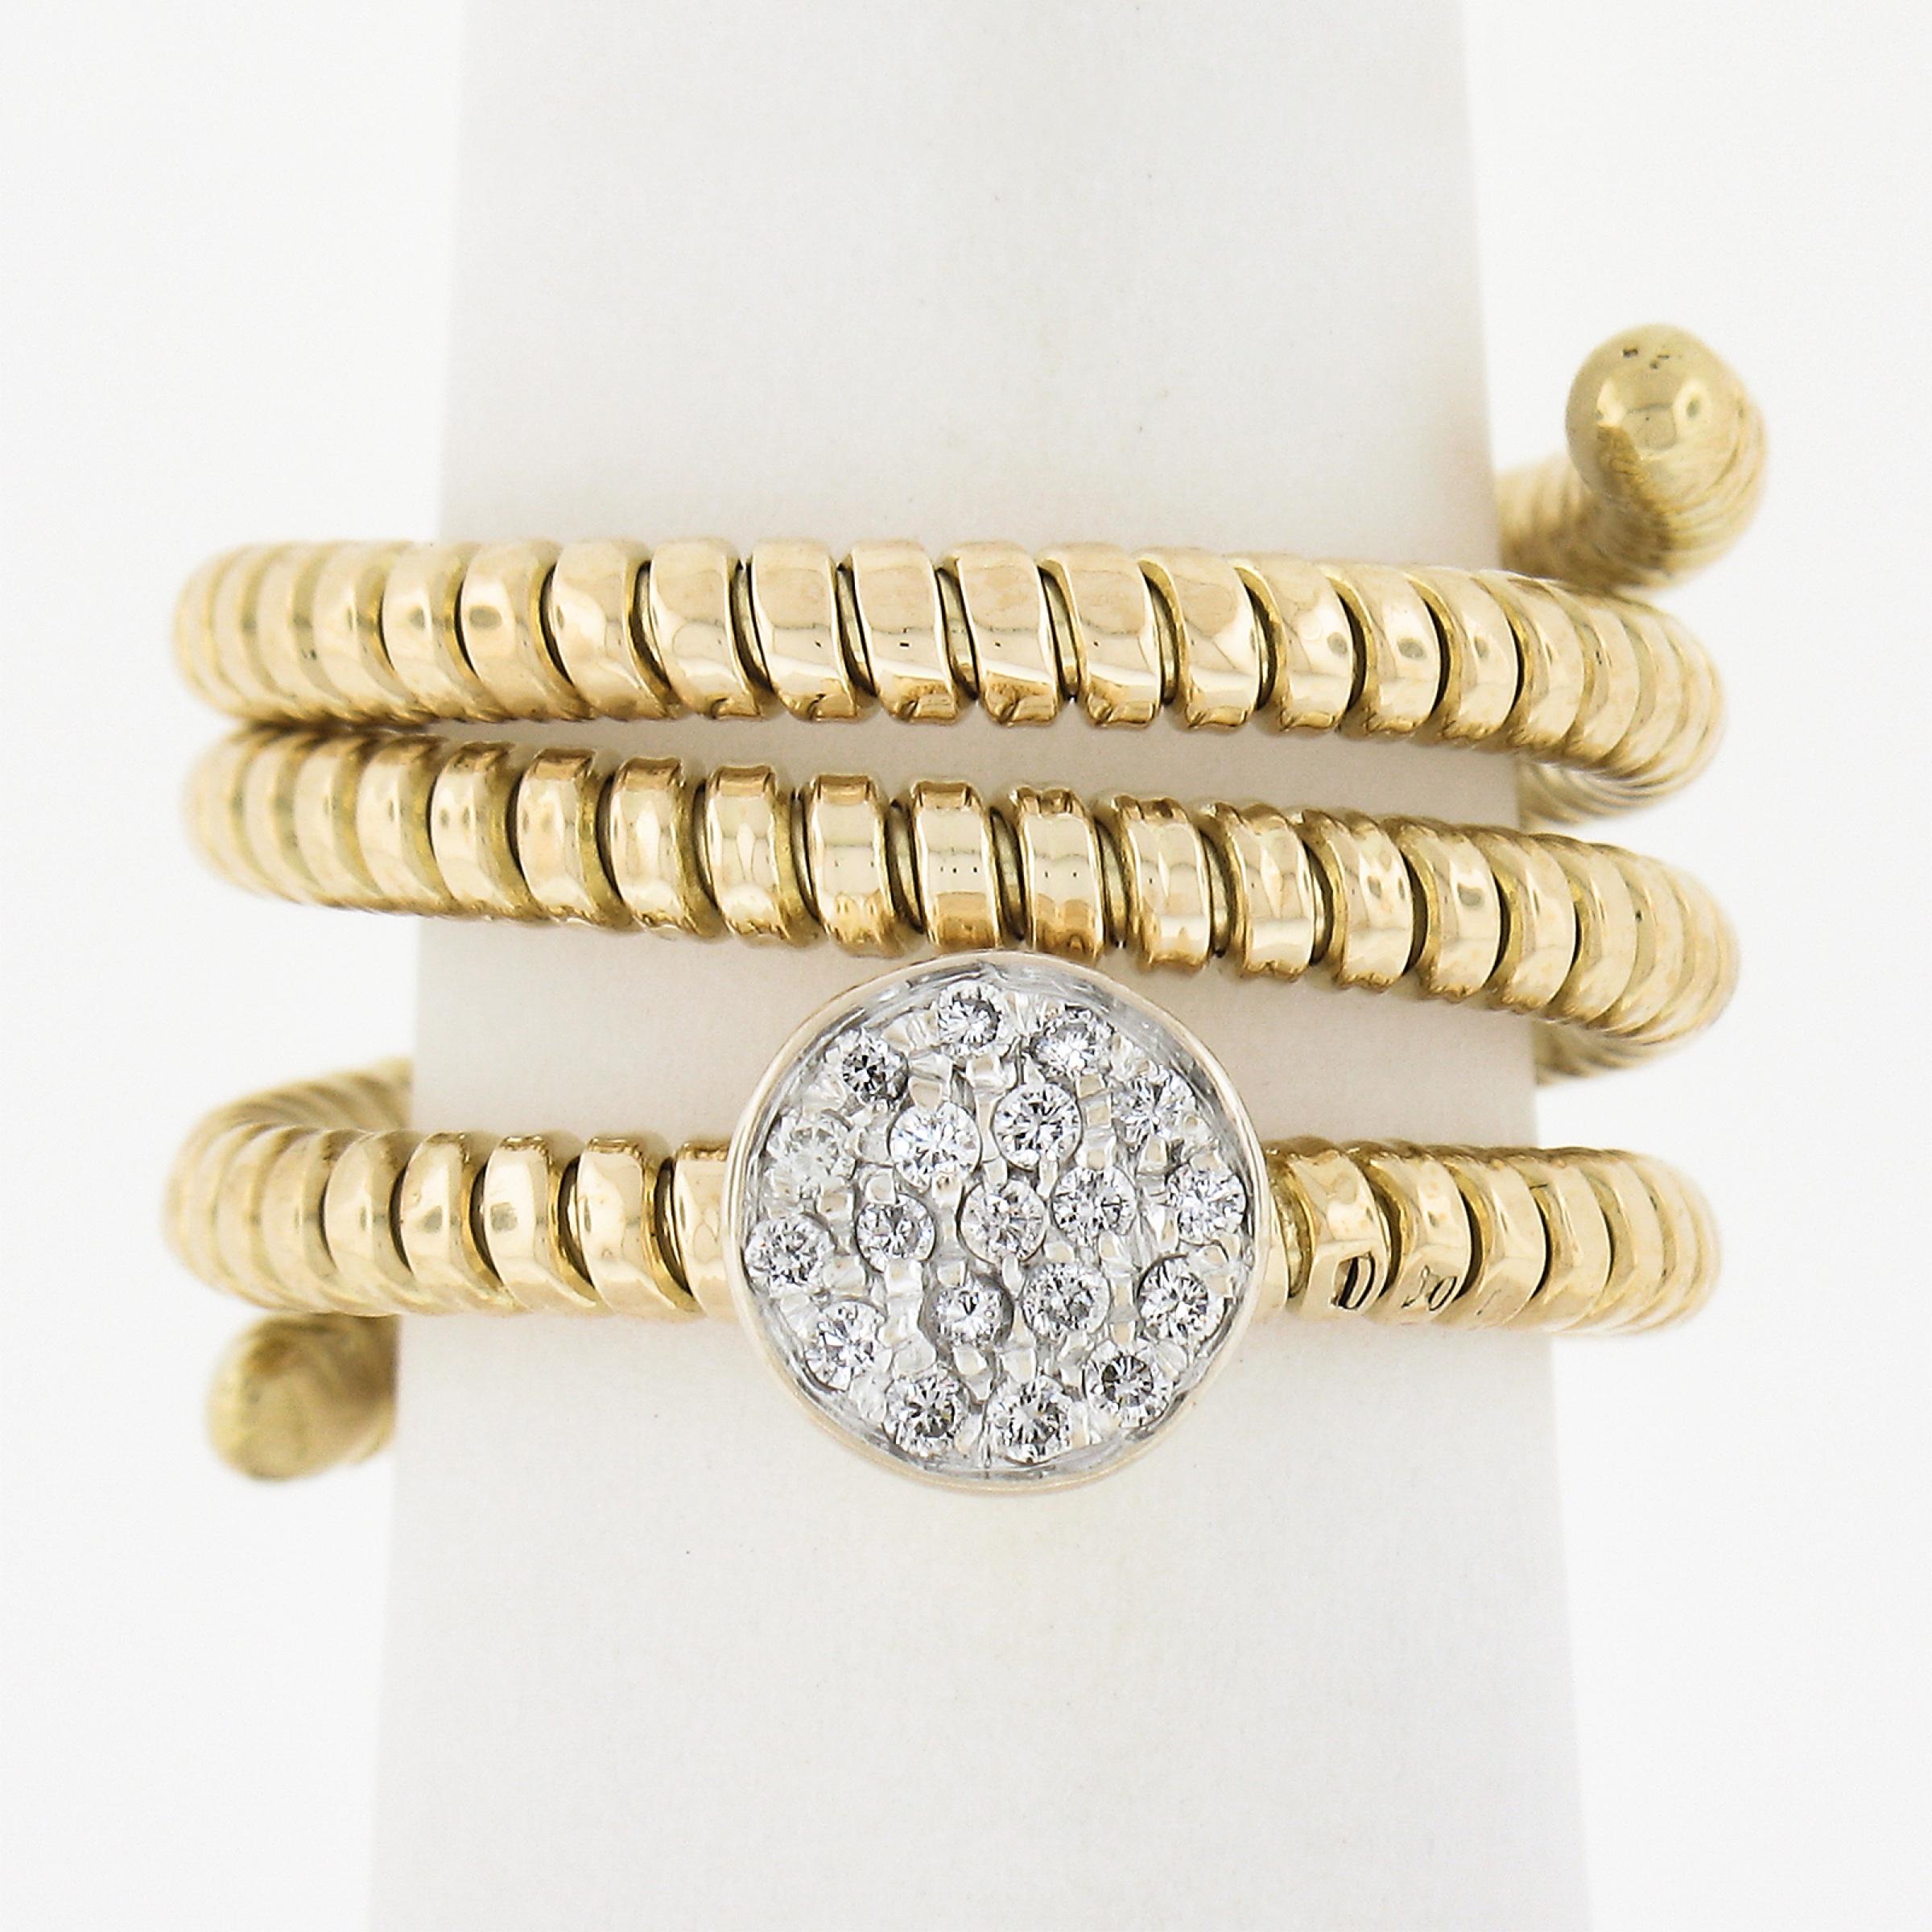 --Stone(s):--
(19) Natural Genuine Diamonds - Round Brilliant Cut - Pave Set - H/I Color - SI1/SI2 Clarity
Total Carat Weight:	0.20 (approx.)

Material: Solid 18k Yellow Gold w/ White Gold Accents
Weight: 10.84 Grams
Ring Size: 6.5 (Fitted on a